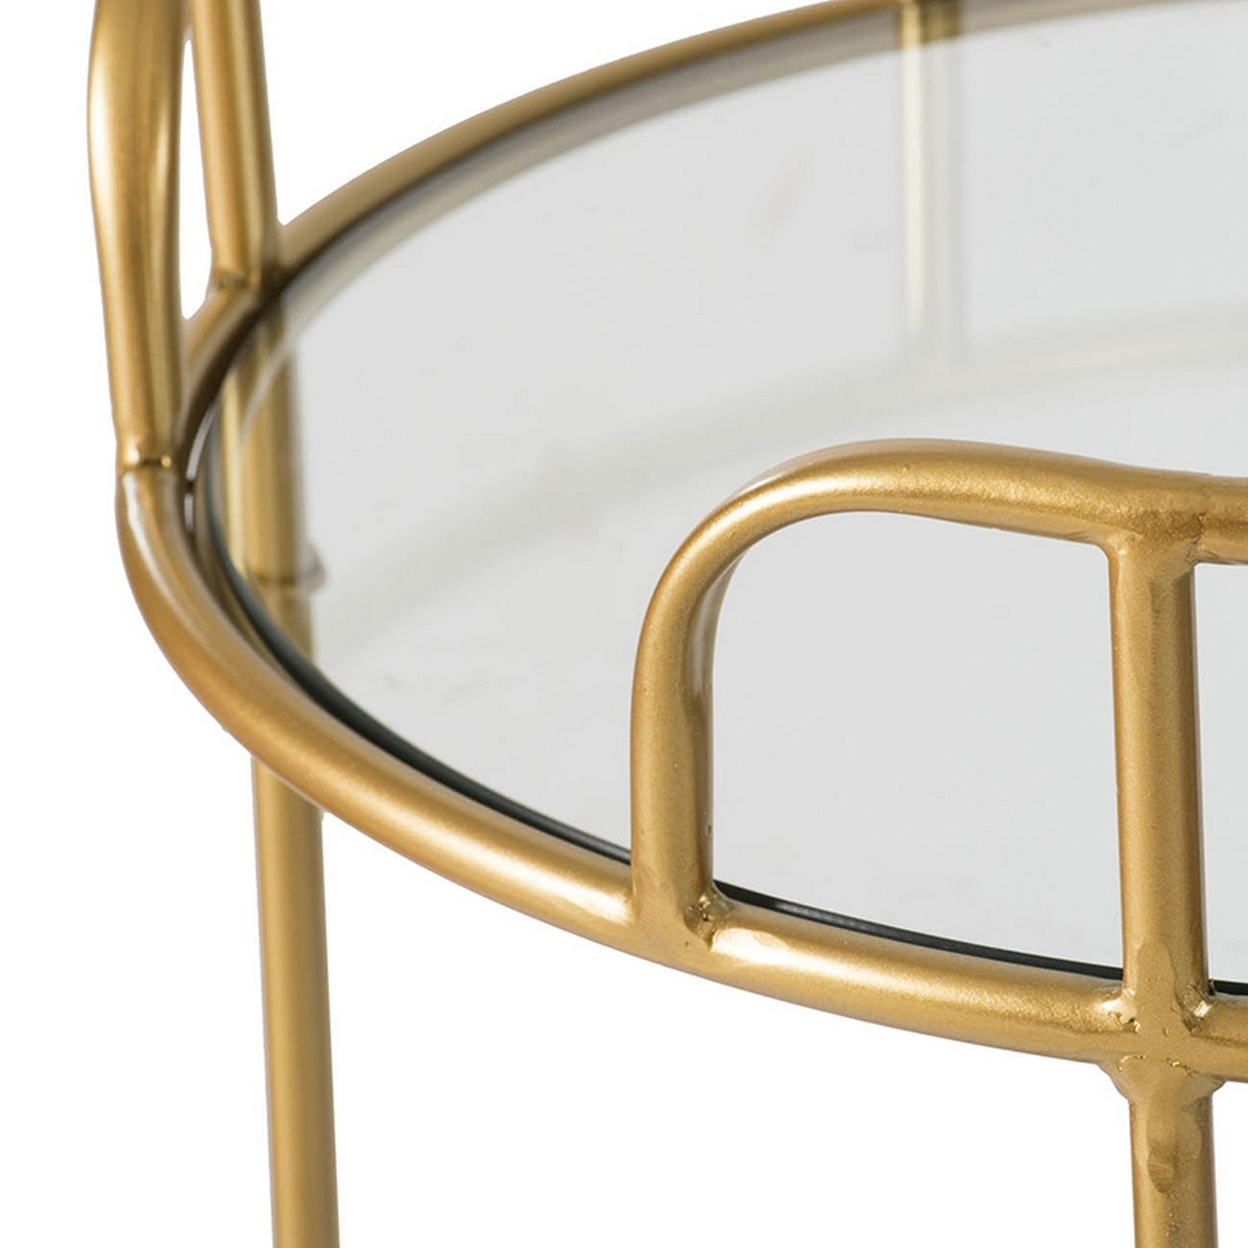 33 Inch Bar Cart, Two Tiered Glass And Marble Shelves, Caster Wheels, Gold- Saltoro Sherpi